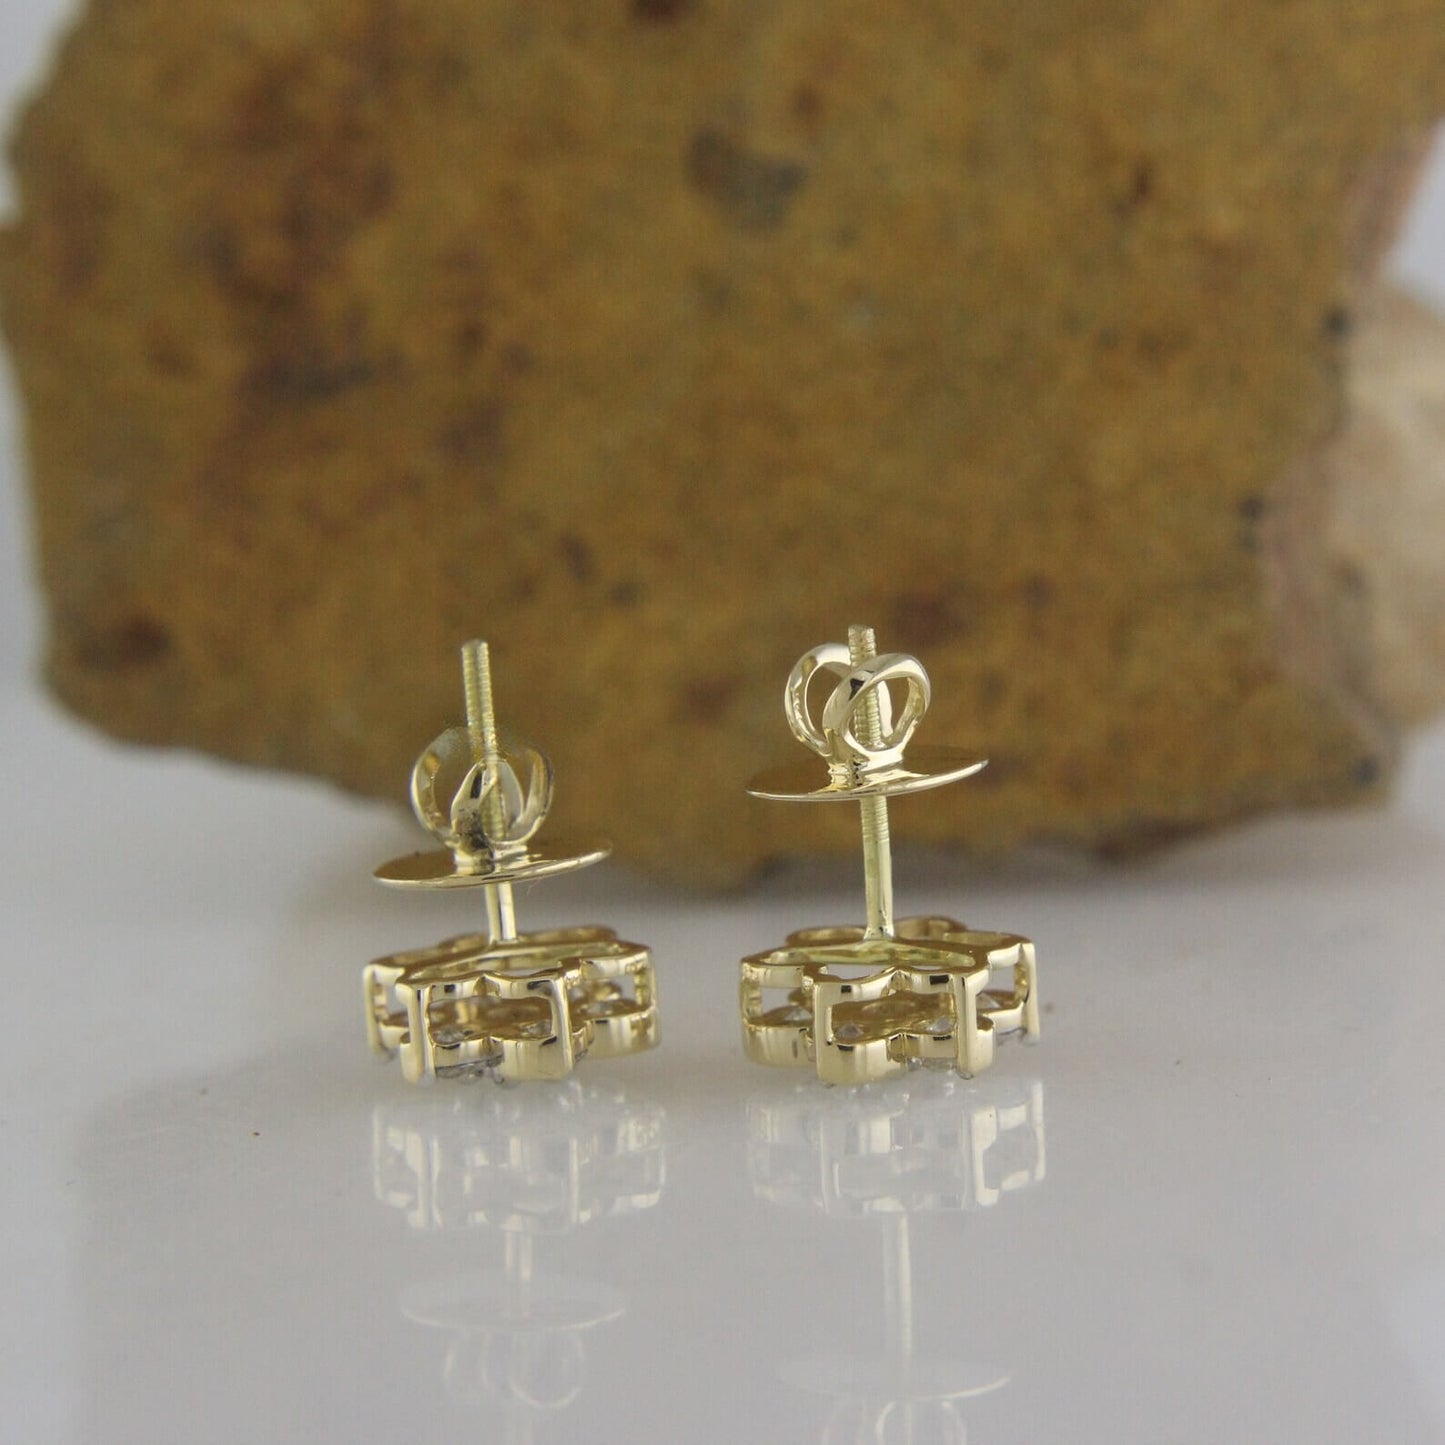 Cluster Lab Diamond Earrings for a Stunning Look